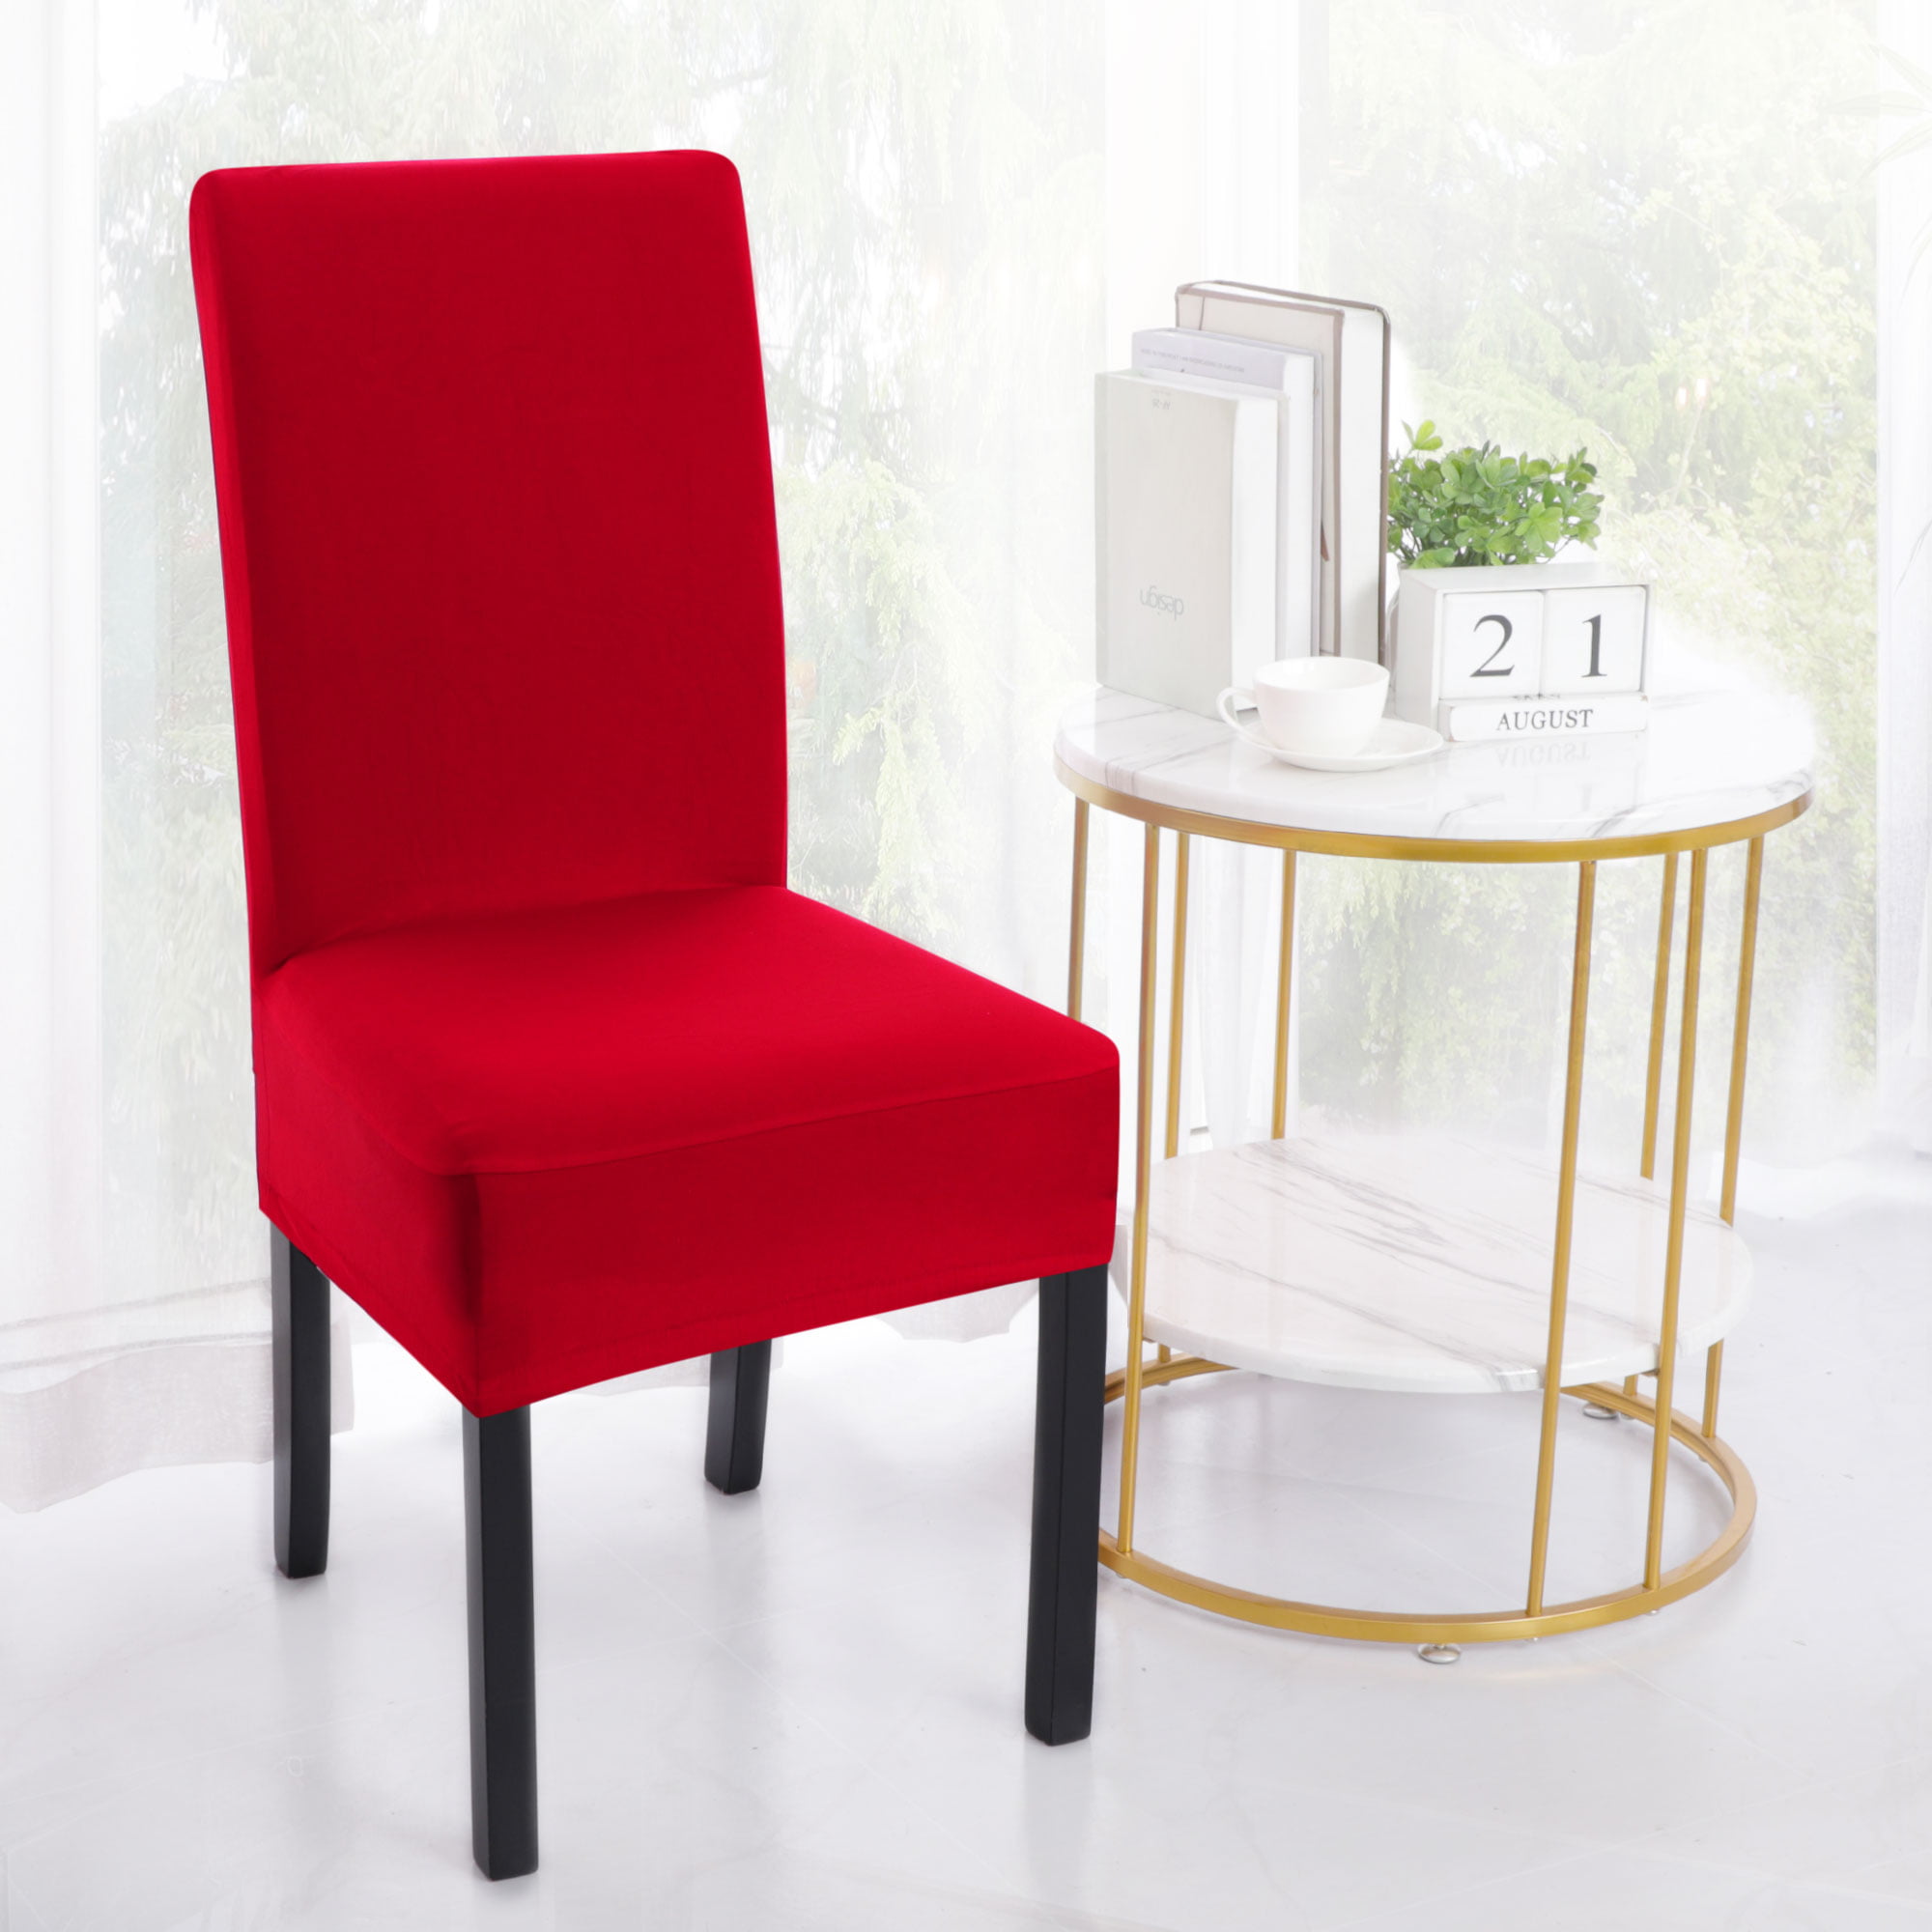 Stretch Chair Cover Short Dining Room Stool Slipcovers Removable Spandex Red 1PC 